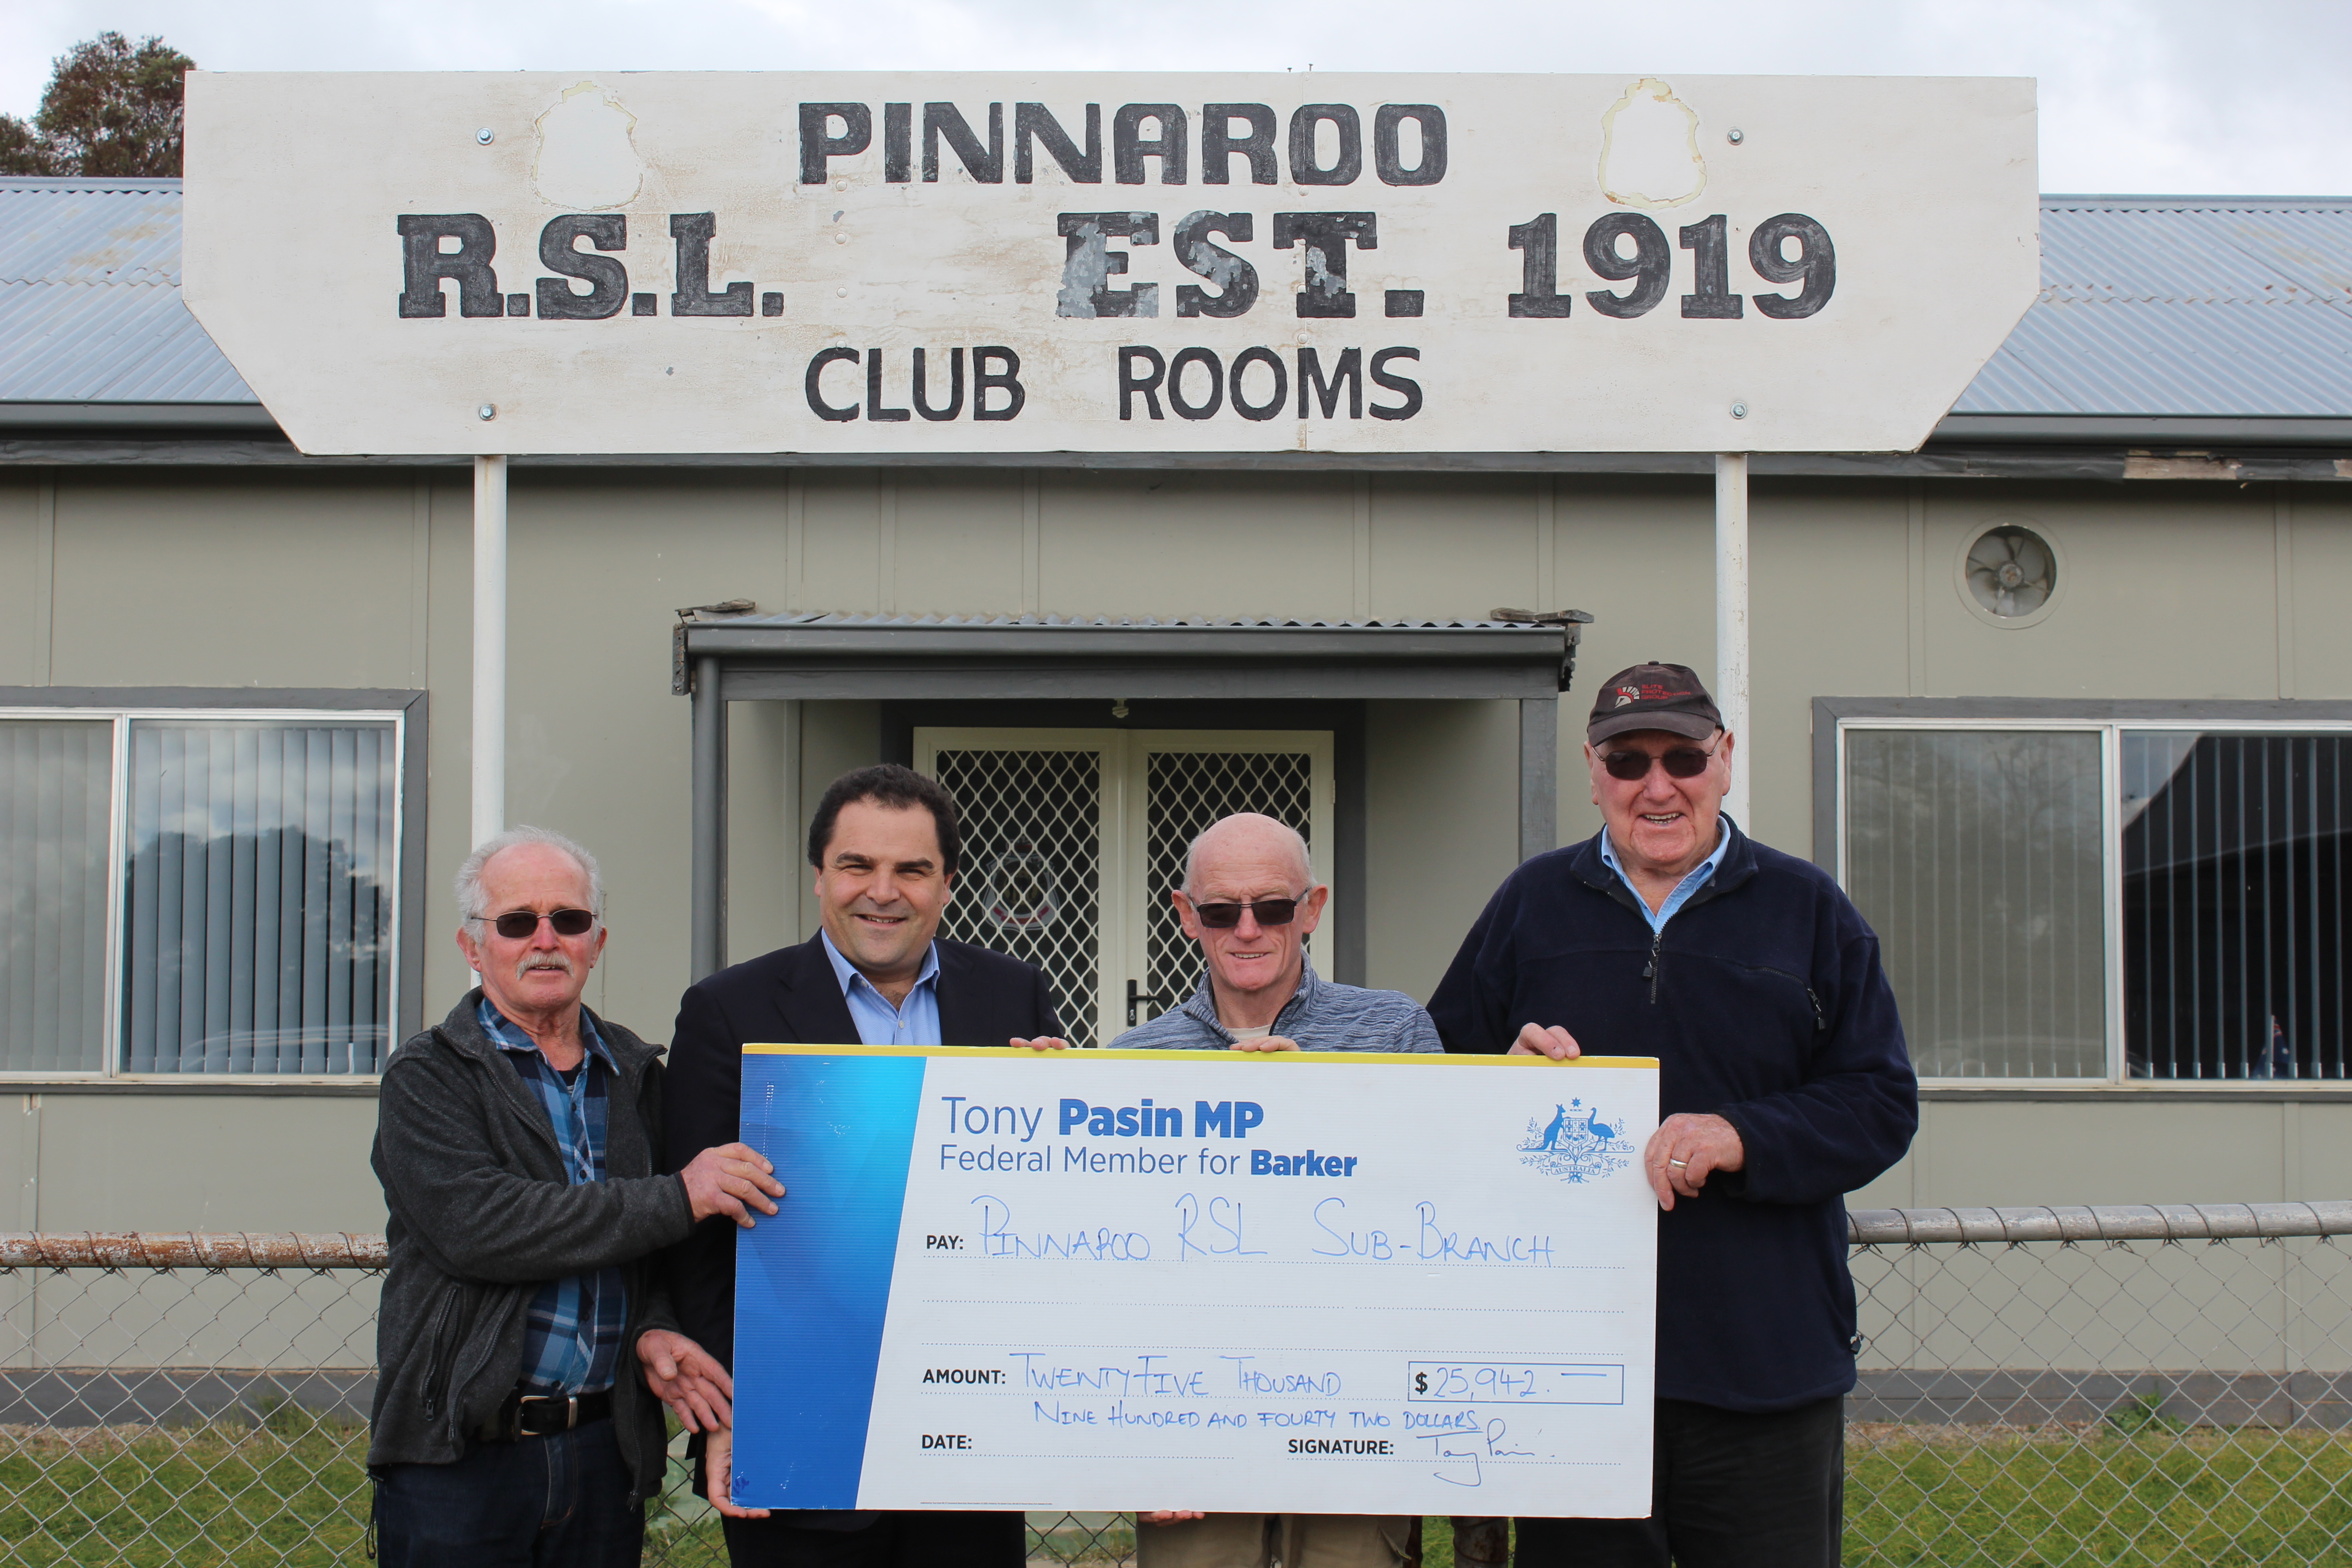 SUPPORTING OUR VETERANS AND COMMUNITY IN PINNAROO